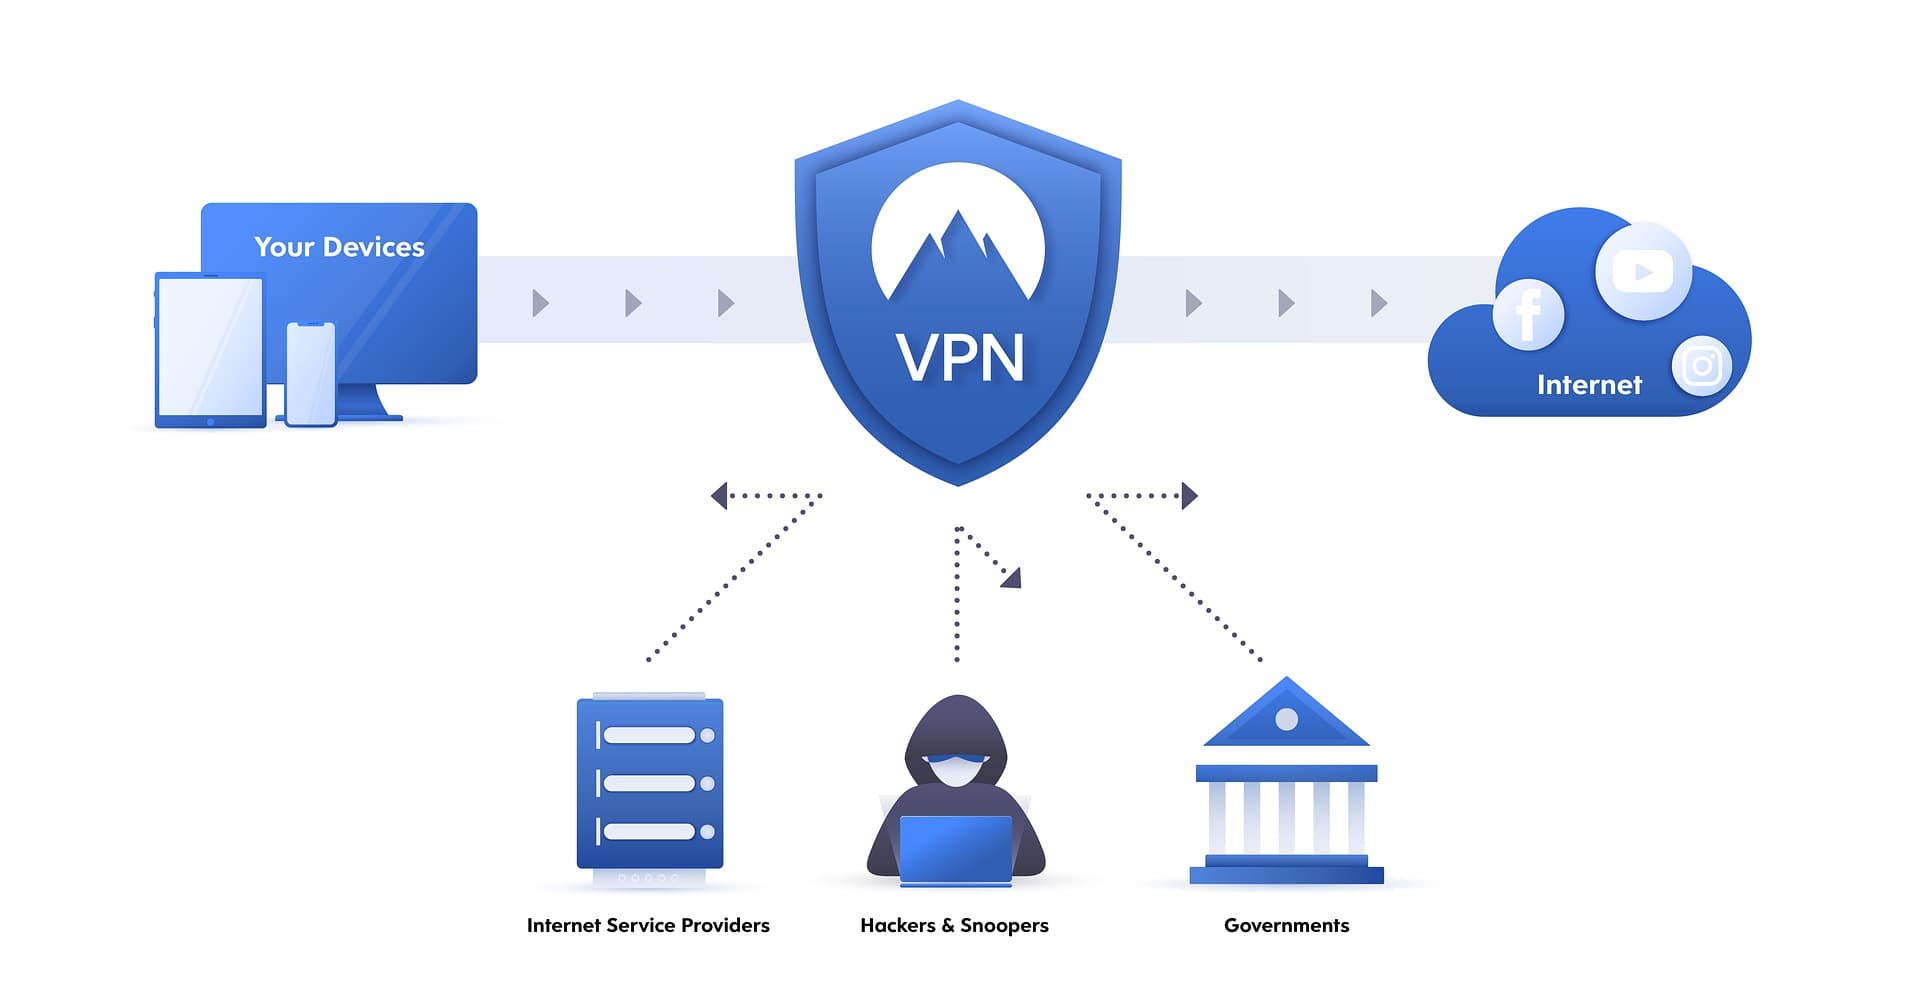 VPN: what are the advantages of a Virtual Private Network?